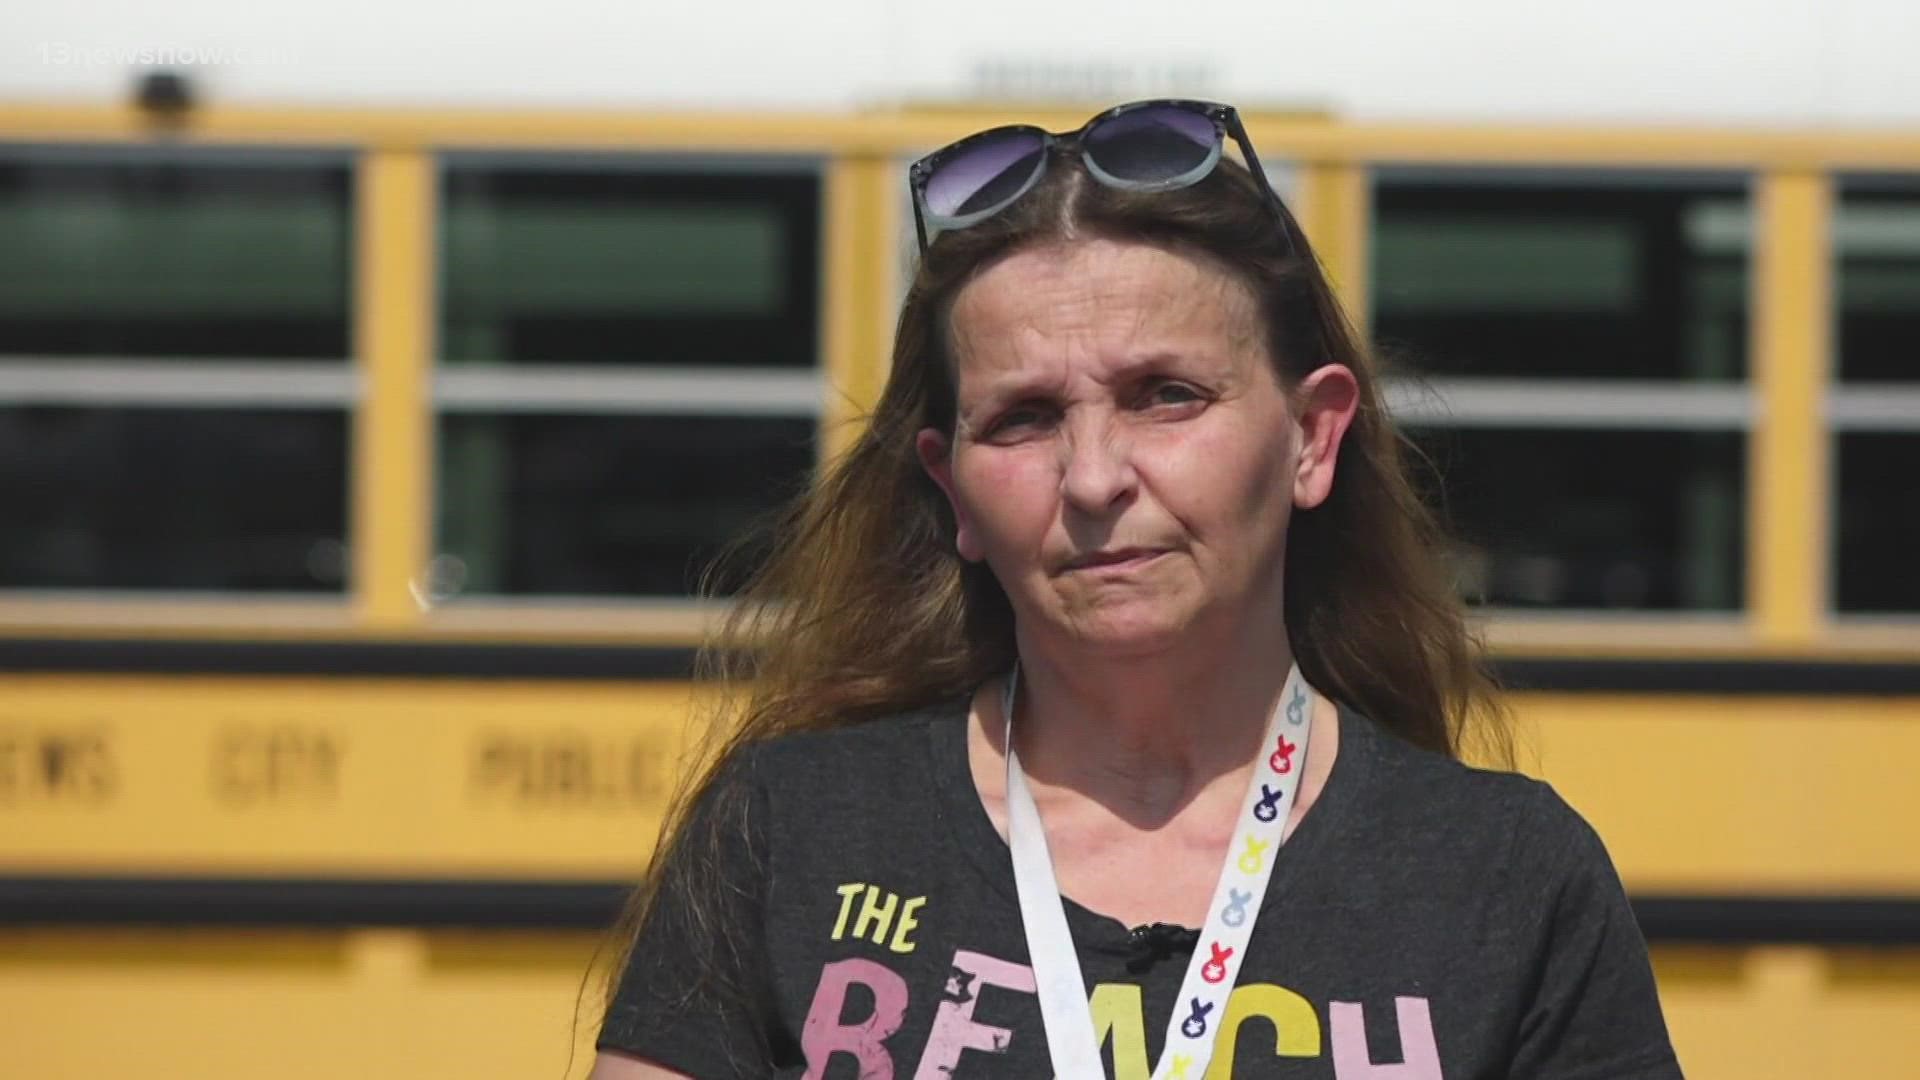 In three months -- from March 15 to June 18 of 2021, -- over 2,900 drivers passed a school bus illegally in Newport News.